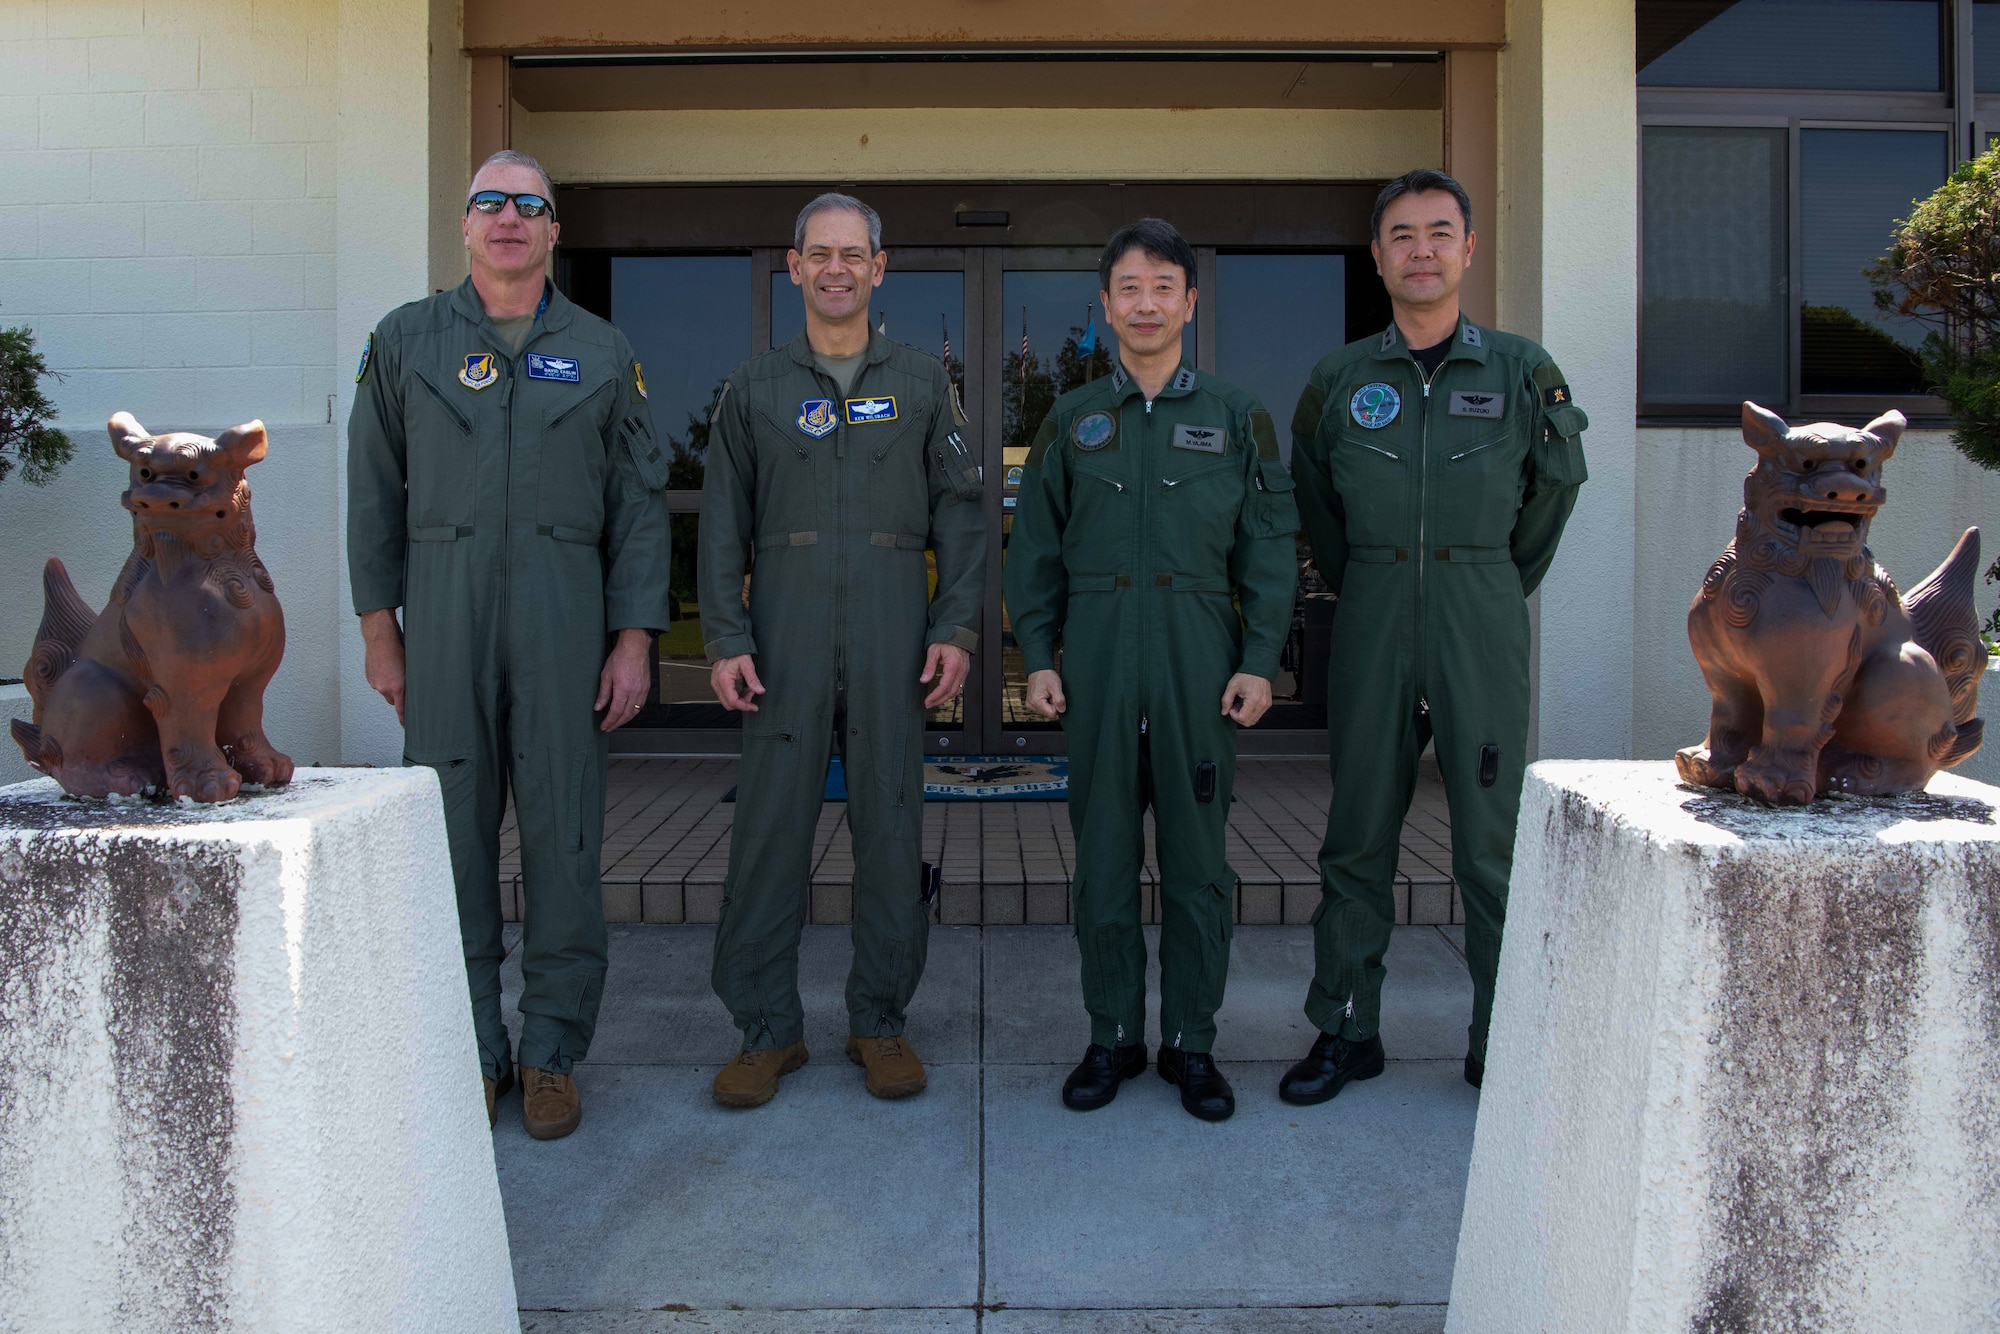 U.S. Air Force Brig. Gen. David Eaglin, 18th Wing commander, left, Gen. Ken Wilsbach, Pacific Air Forces commander, Japan Air Self-Defense Force Lt. Gen. Masahito Yajima, Southwestern Air Defense Force commander, and Japan Air Self-Defense Force Maj. Gen. Shigenao Suzuki, 9th Air Wing commander, pose for a photo at Kadena Air Base, Japan, April 16, 2023. Cooperation among Allies and partners is critical in deterring aggression and enhancing interoperability allowing our forces to counter military aggression by sharing responsibilities for common defense. (U.S. Air Force photo by Airman 1st Class Jonathan R. Sifuentes)